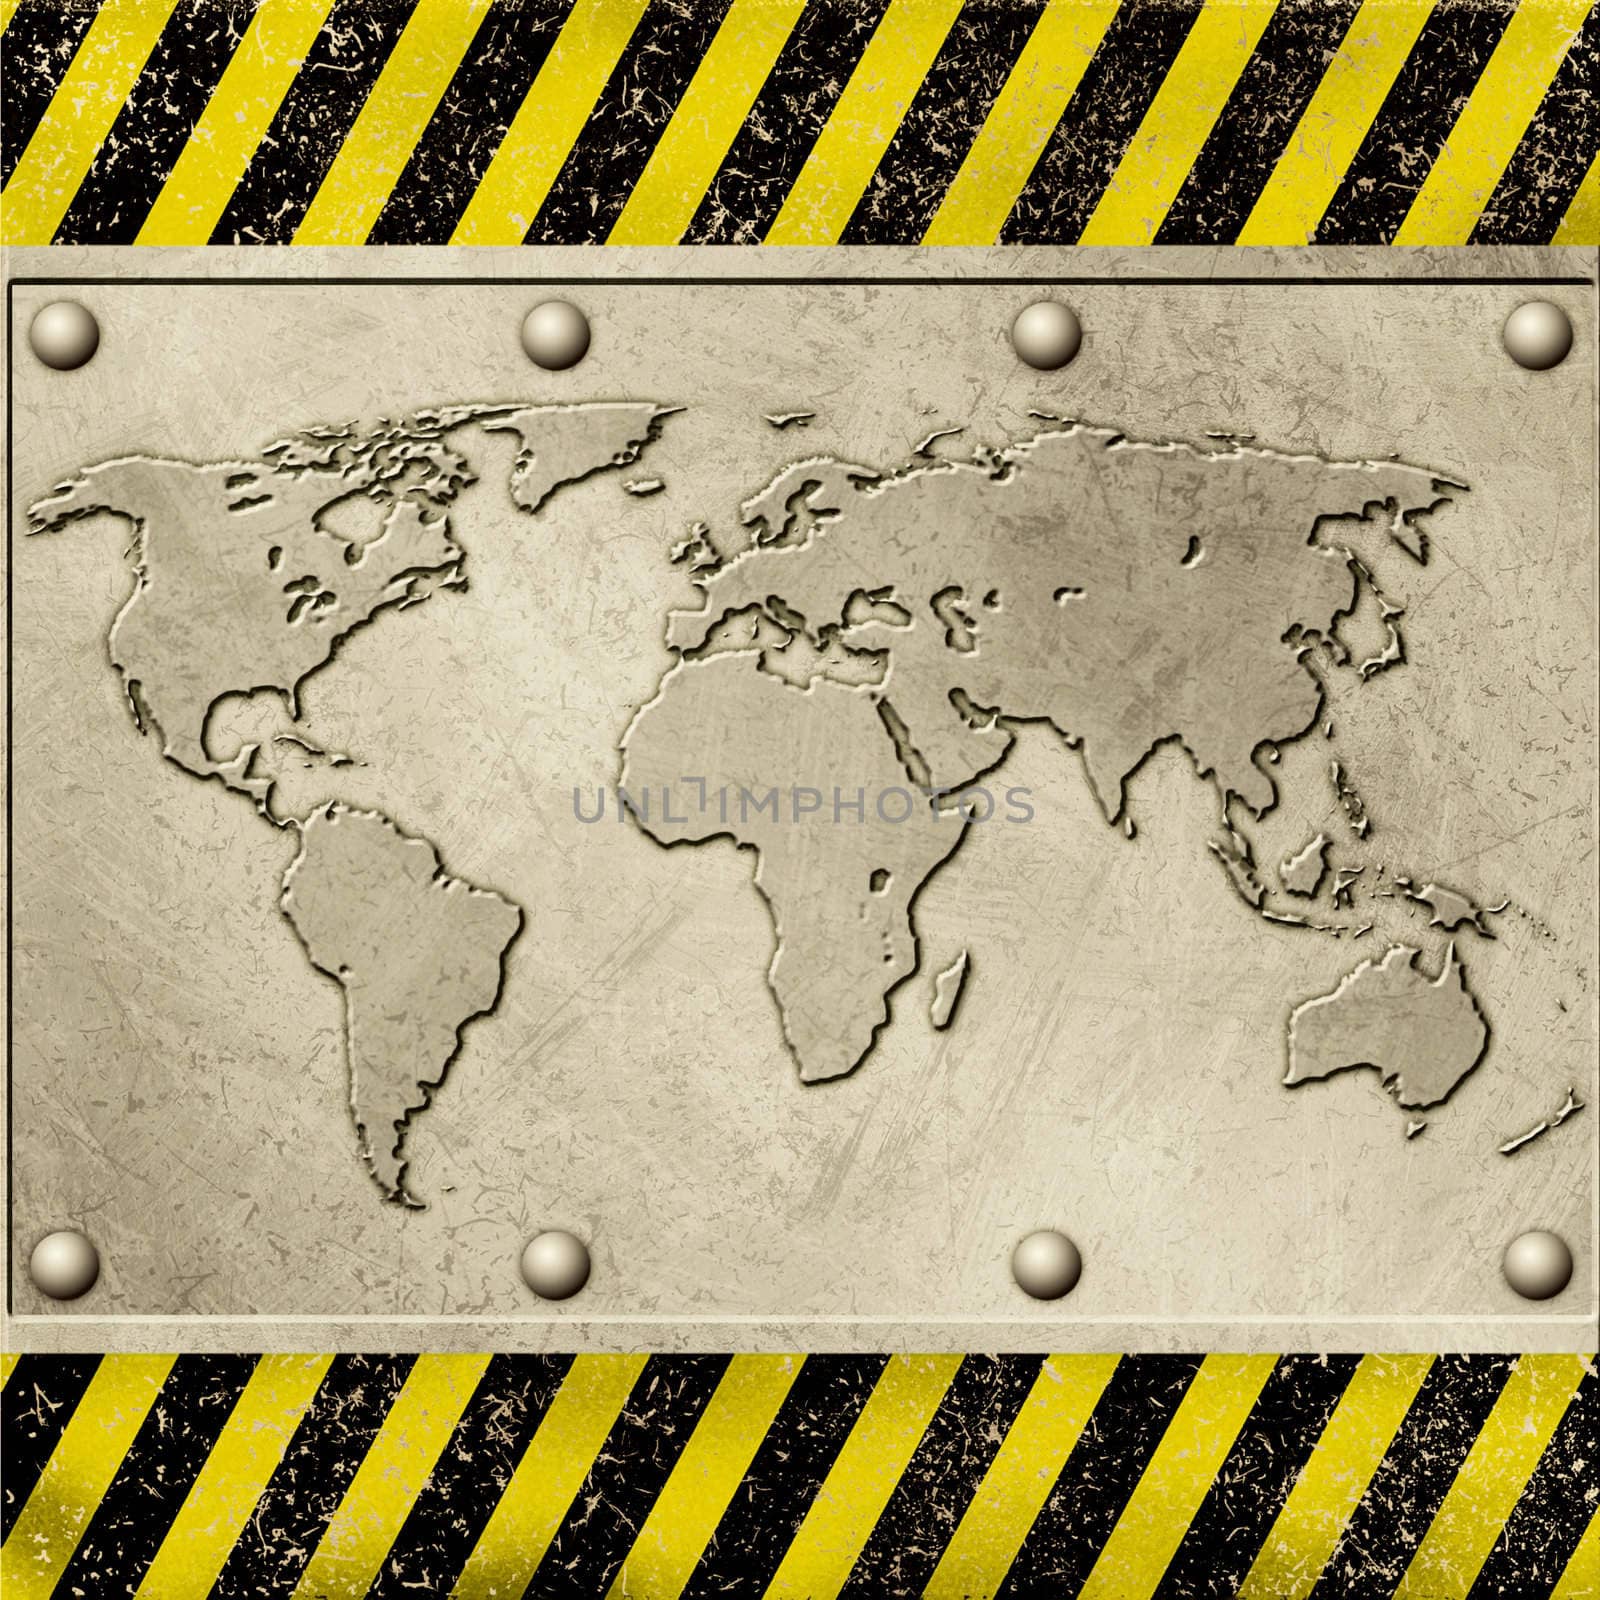 A Grunge Metal Background with World Map